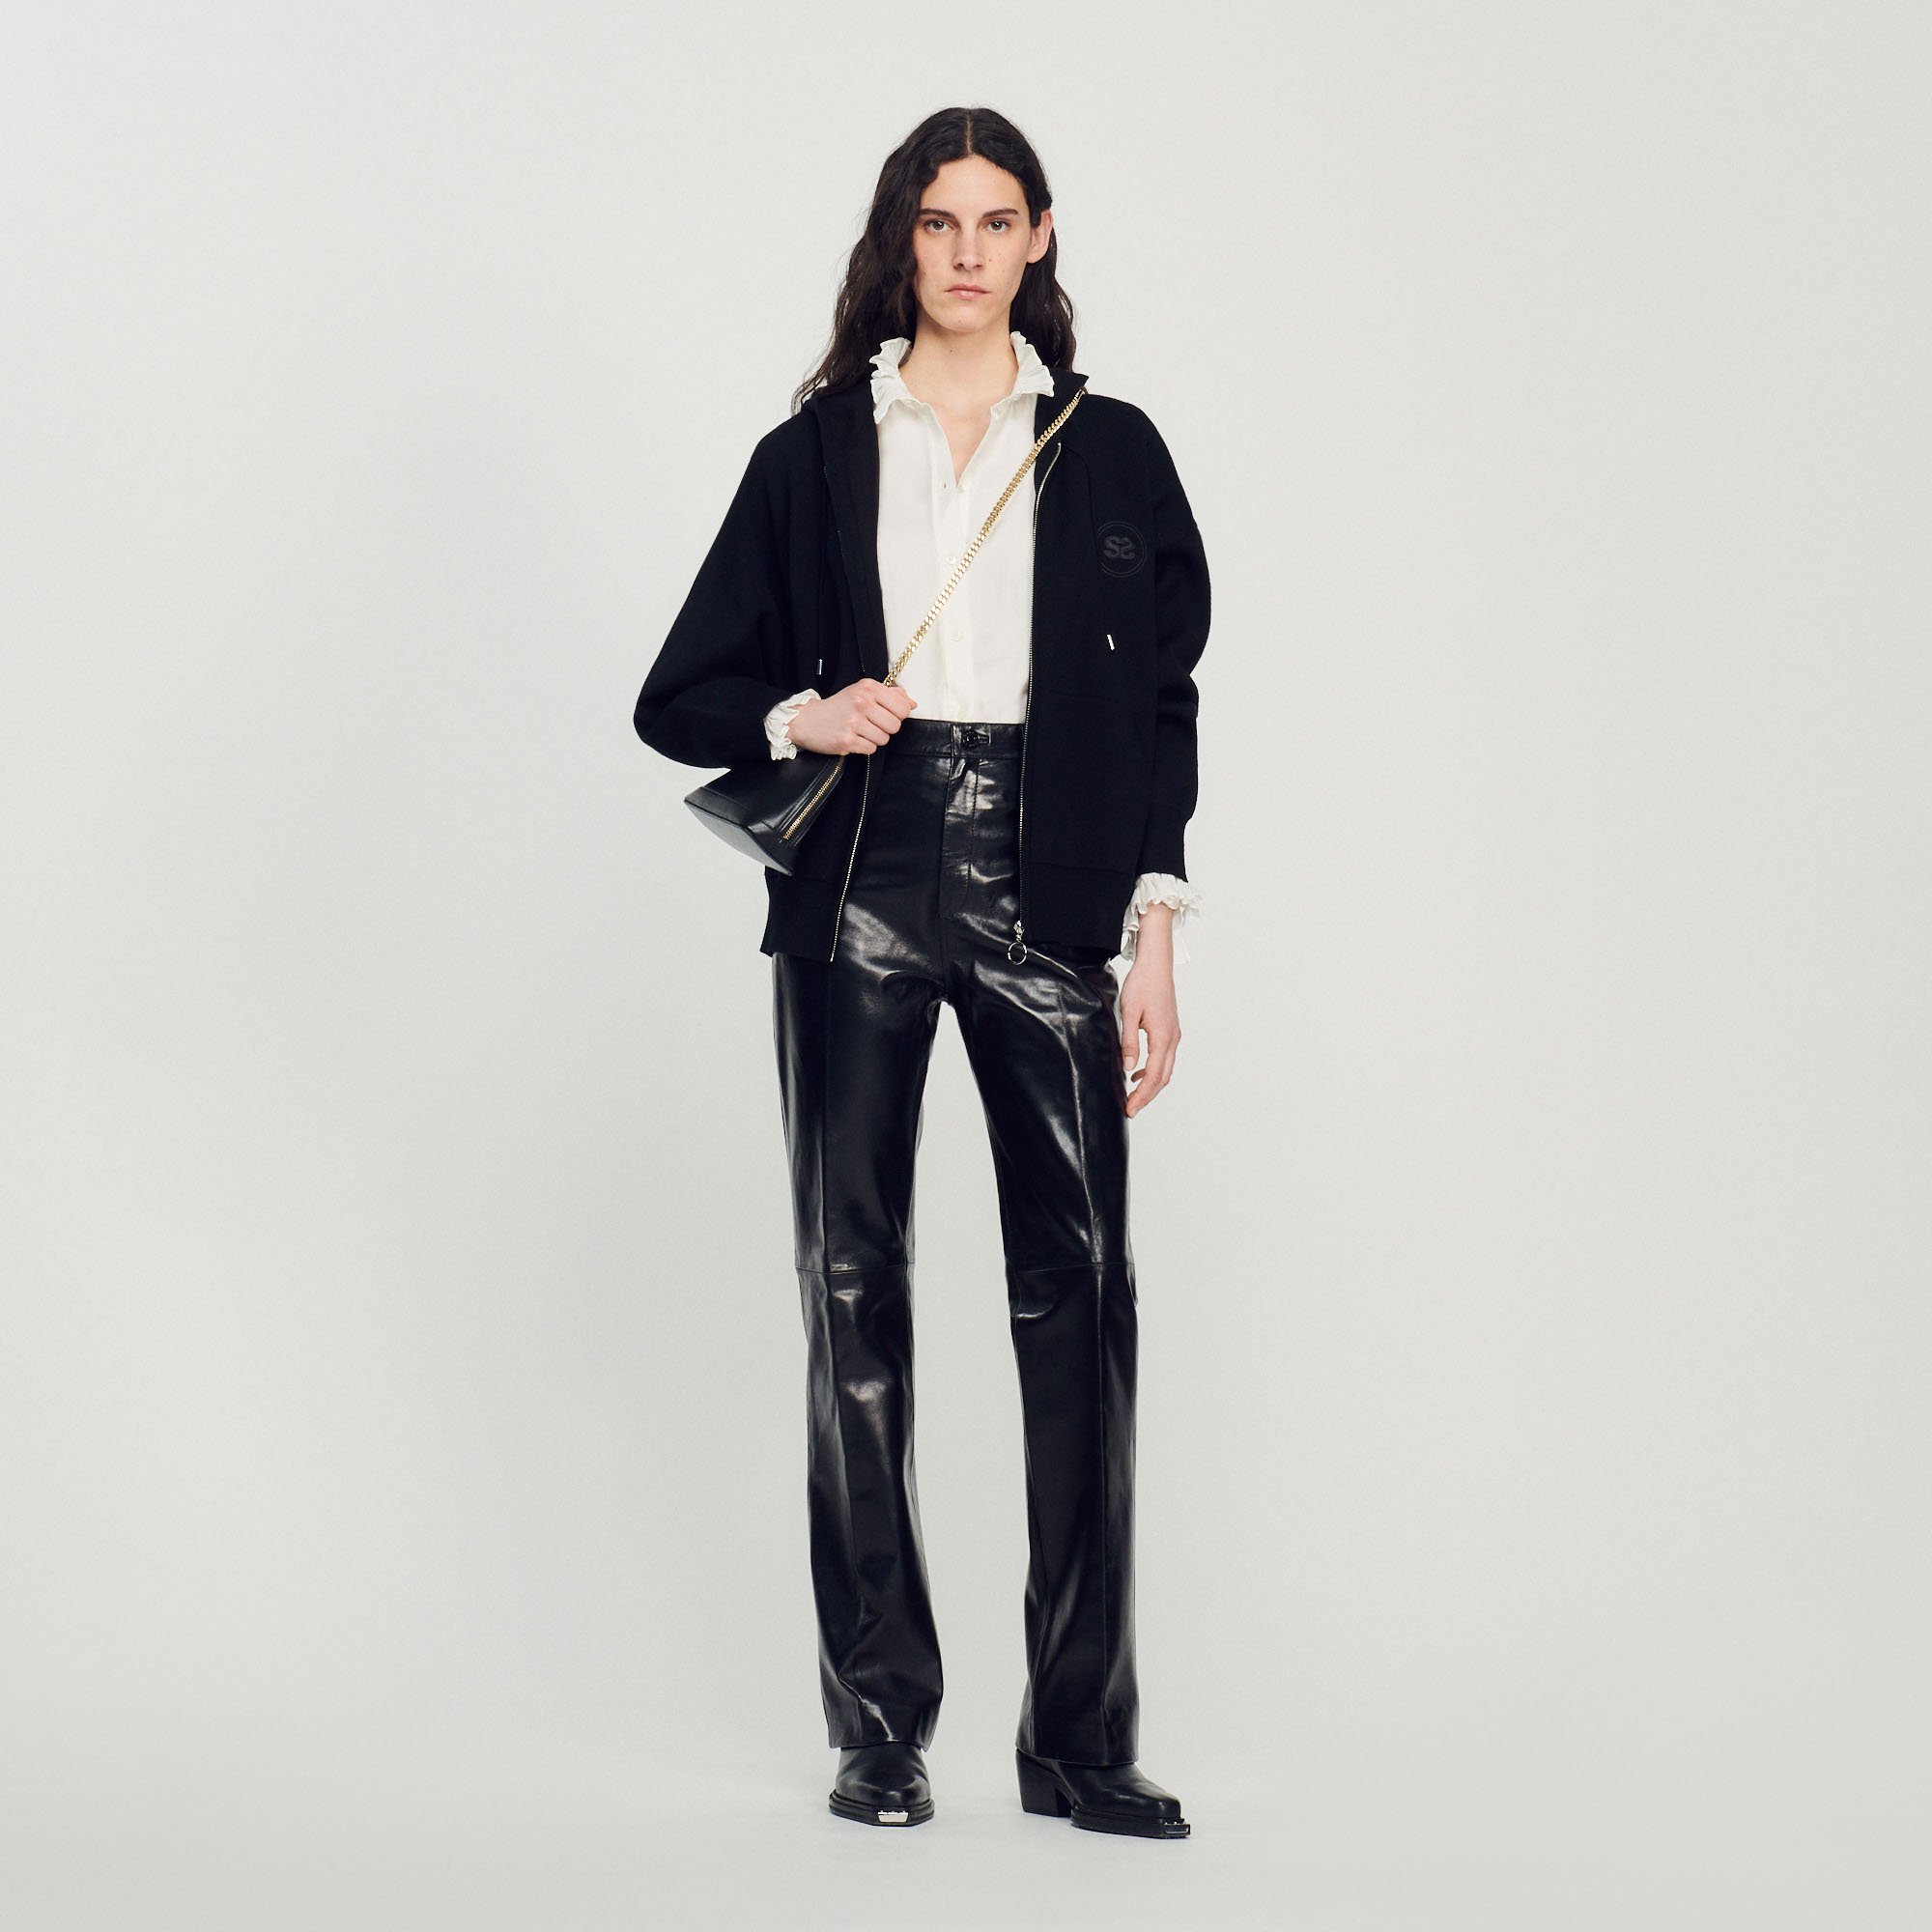 Sandro lamb Trouser lining: Leather straight-leg pants with a flared hem and front and back pockets